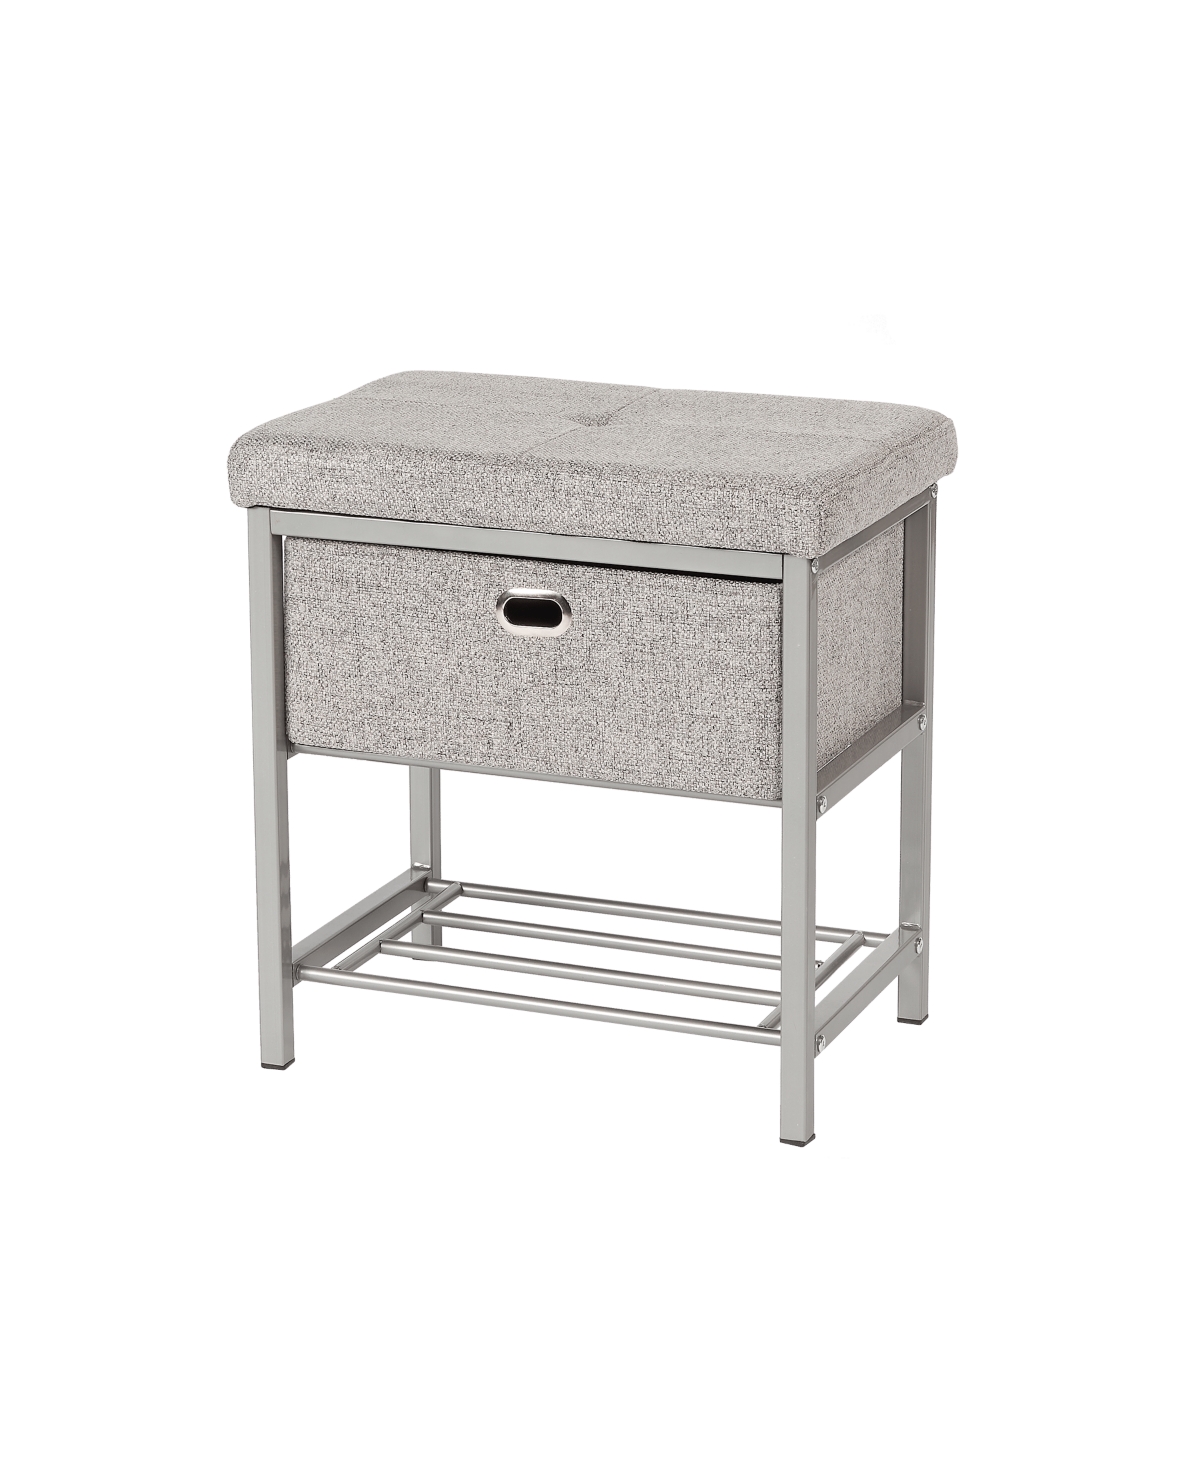 Neatfreak Single Seat Bench With Drawer In Gray